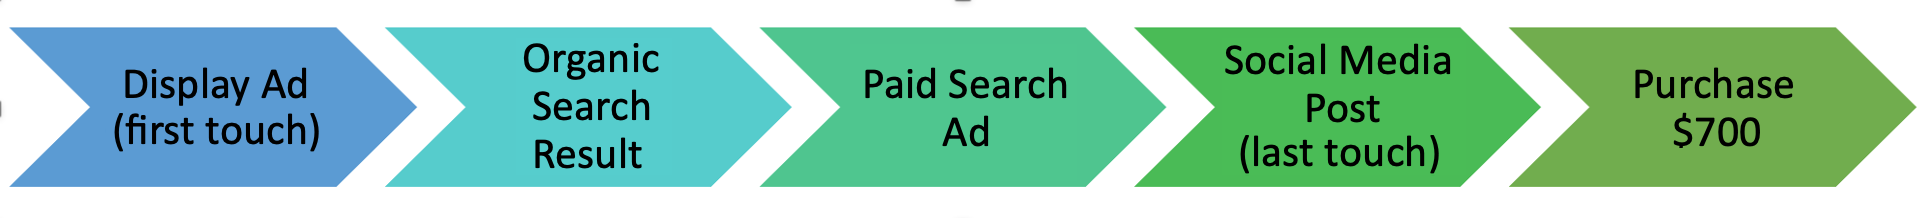 display ad/first touch, organic search result, paid search ad, social media post/last touch, purchase $700